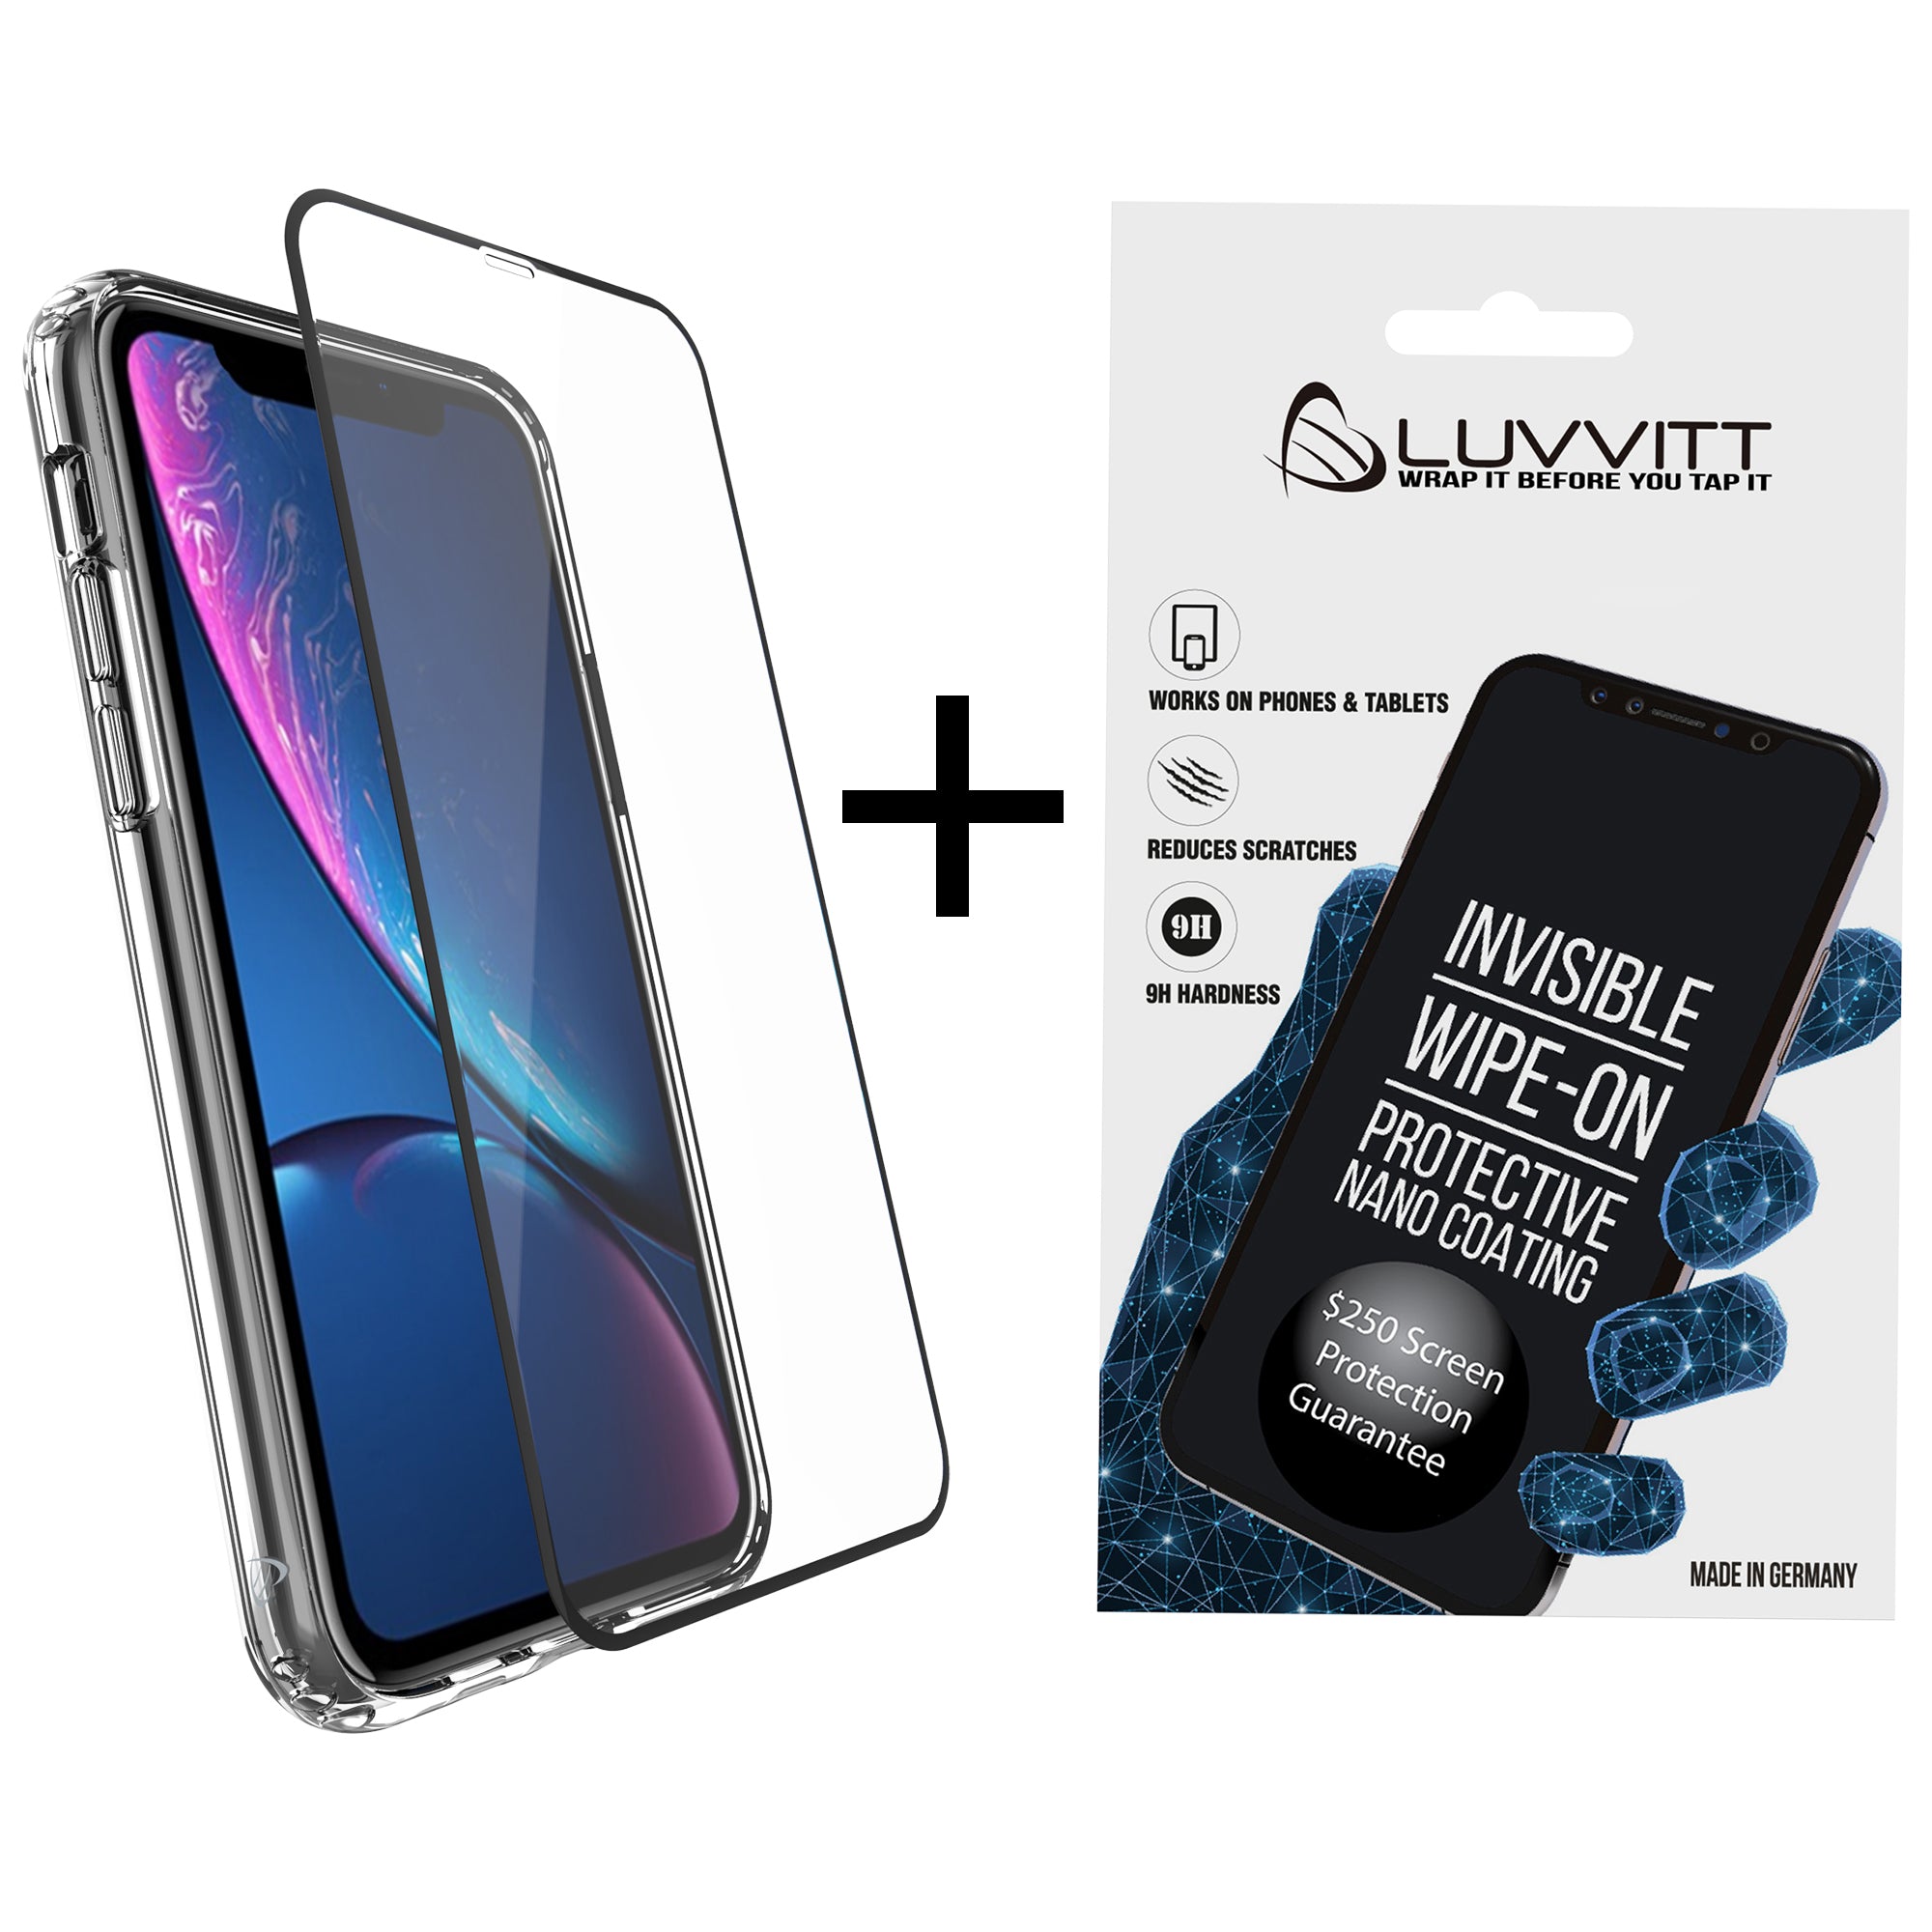 Luvvitt $250 Screen Protection Guarantee Liquid Glass + Tempered Glass Protector Bundle for iPhone 11 2019